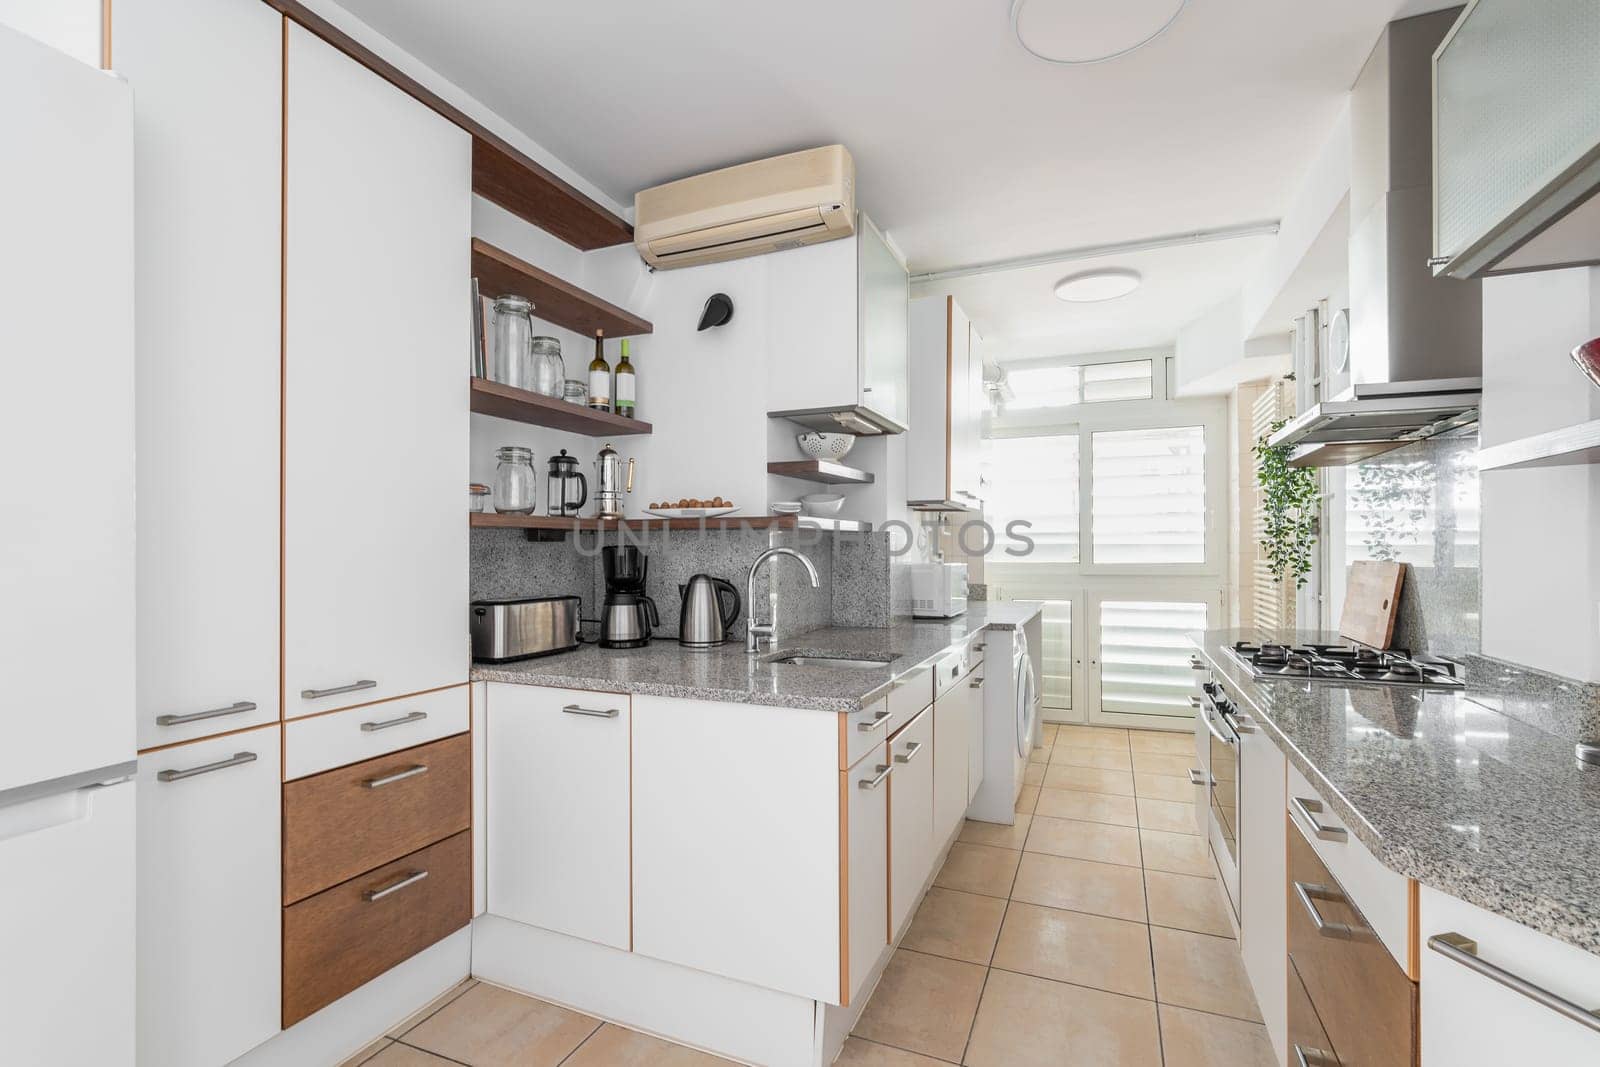 Kitchen unit with different cabinets and cooking appliances in smart apartment. Effective interior design of studio flat. Conveniences for living